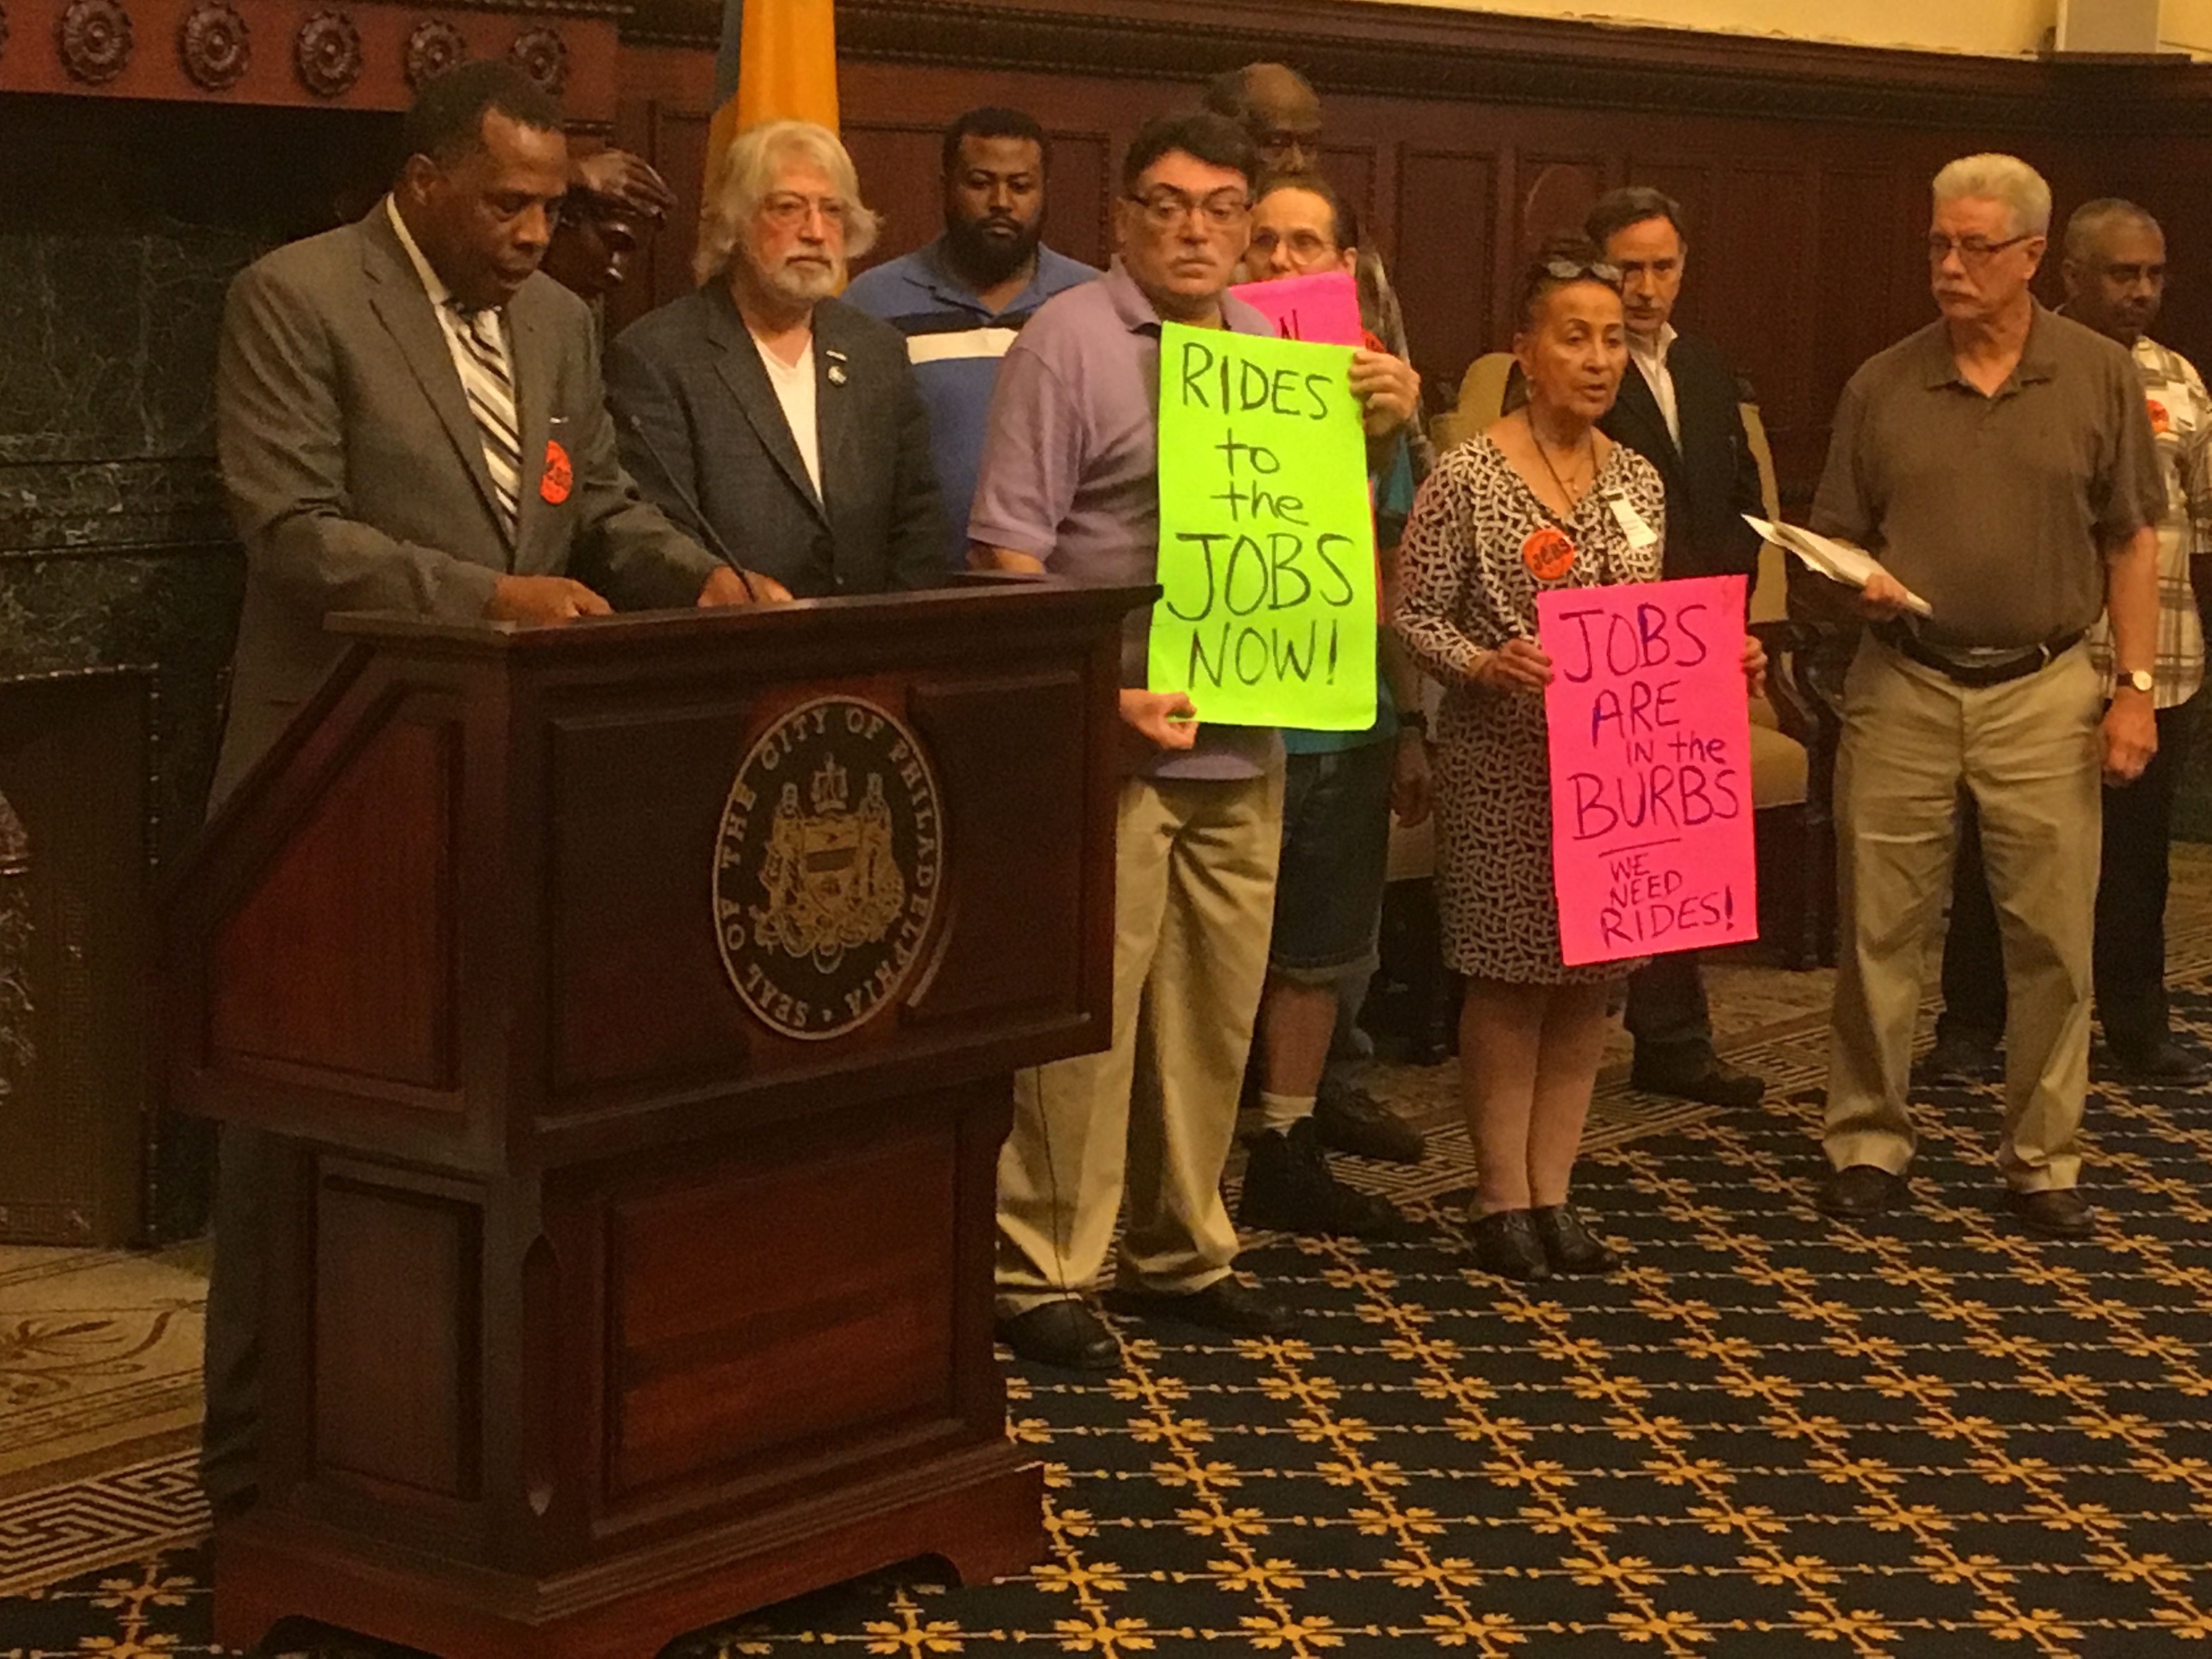 Philadelphia Unemployment Project board members and supporters rally in the mayor's reception room for more reverse commuter vanpool funds